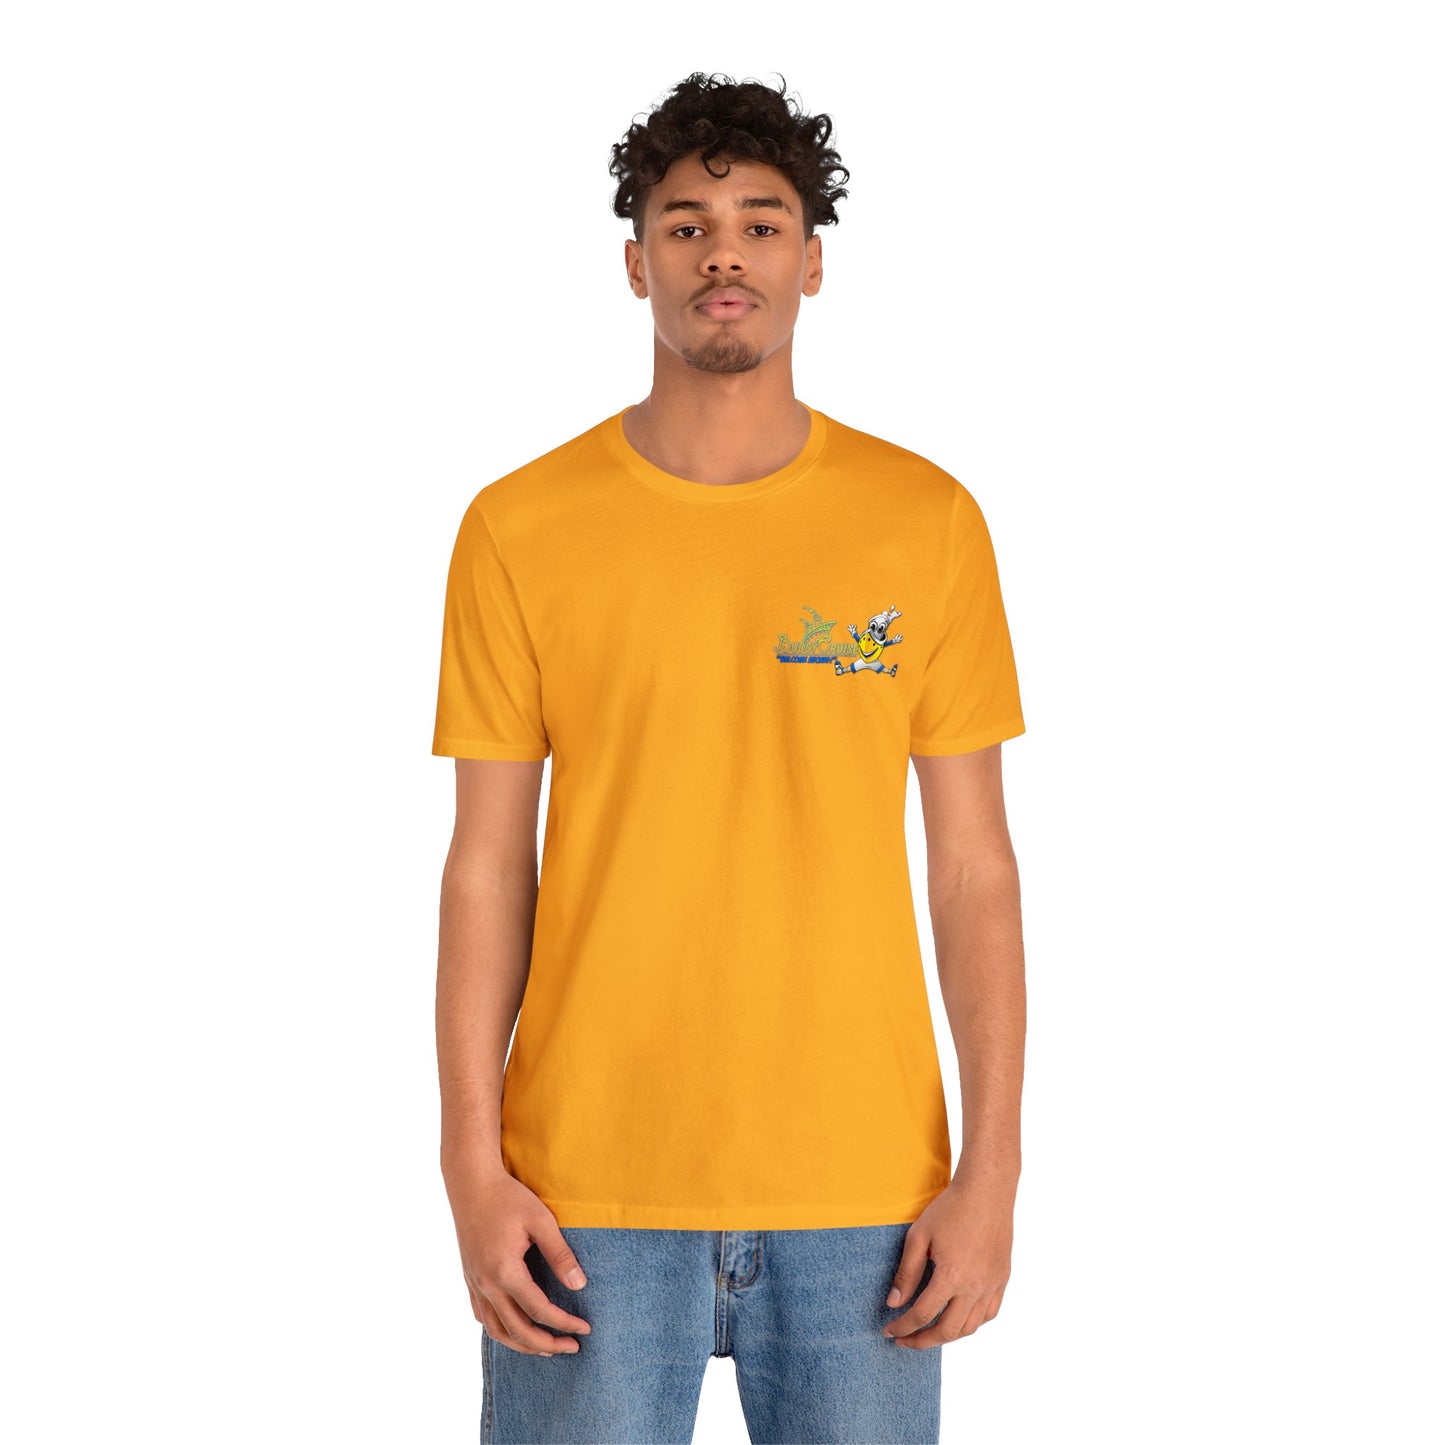 BUDDY CRUISE Unisex Jersey Short Sleeve Tee in 9 Colors